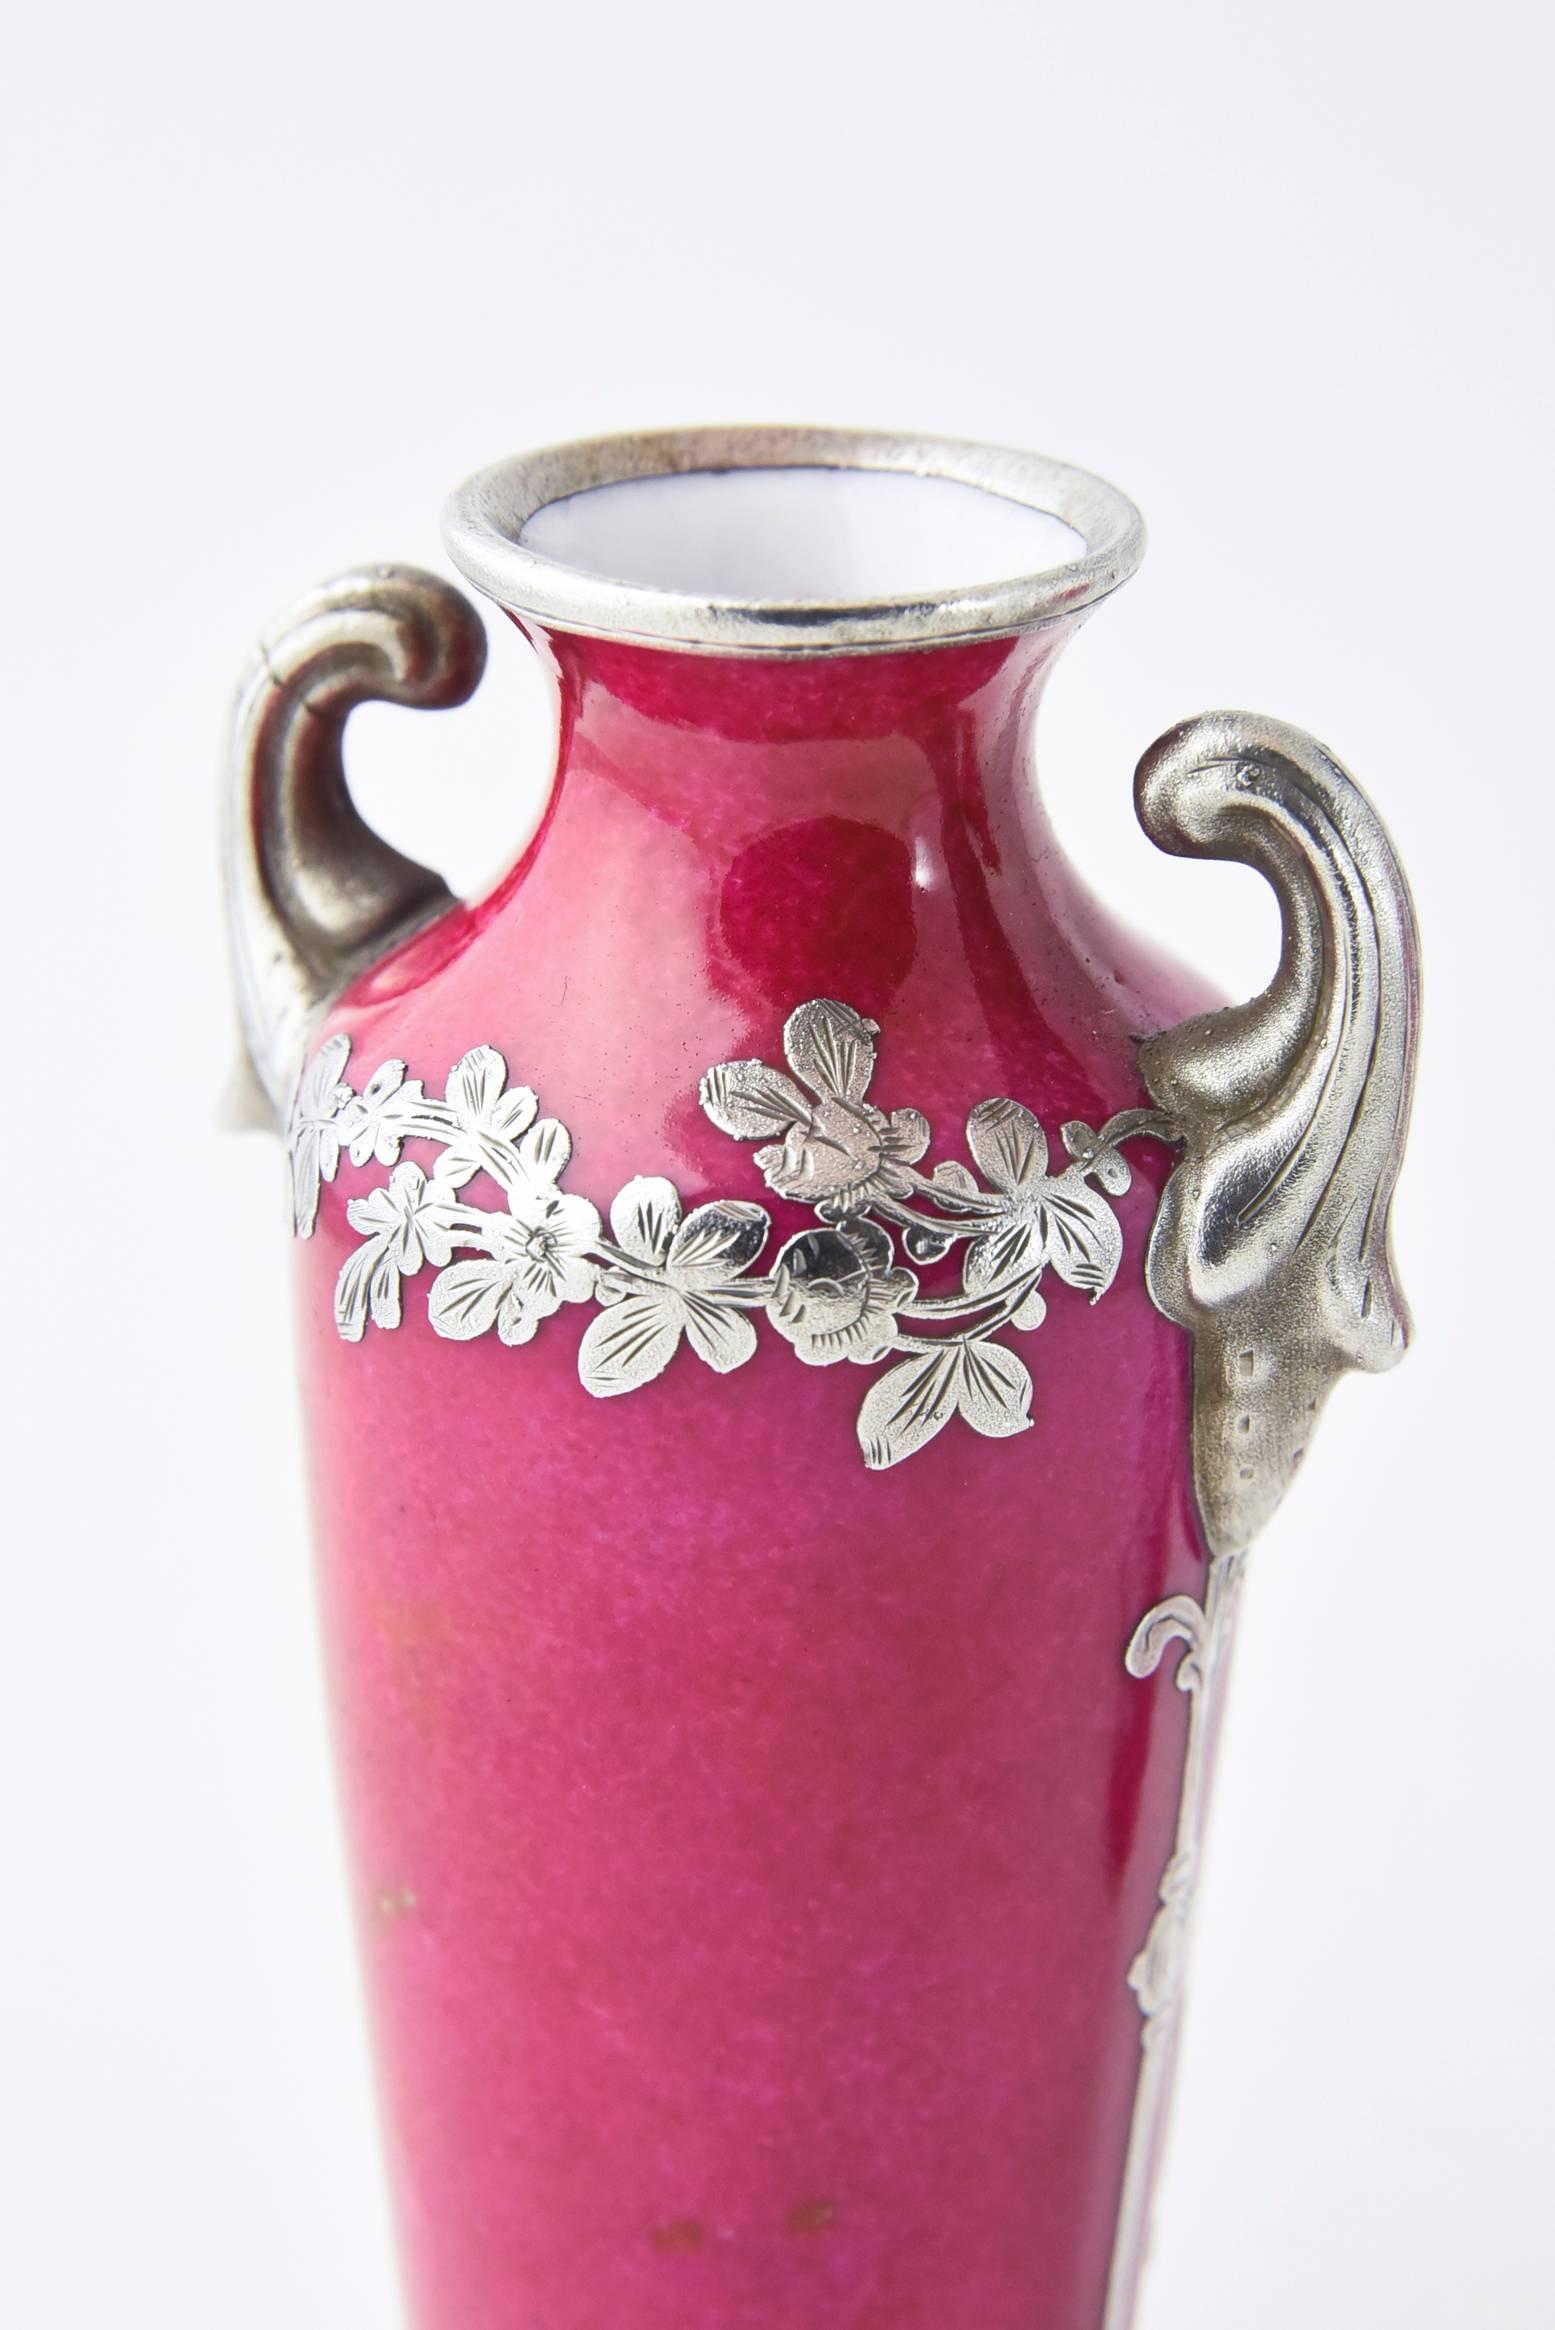 19th Century Pair of Pink Miniature Antique Portrait Vases with Silver Overlay Decoration For Sale